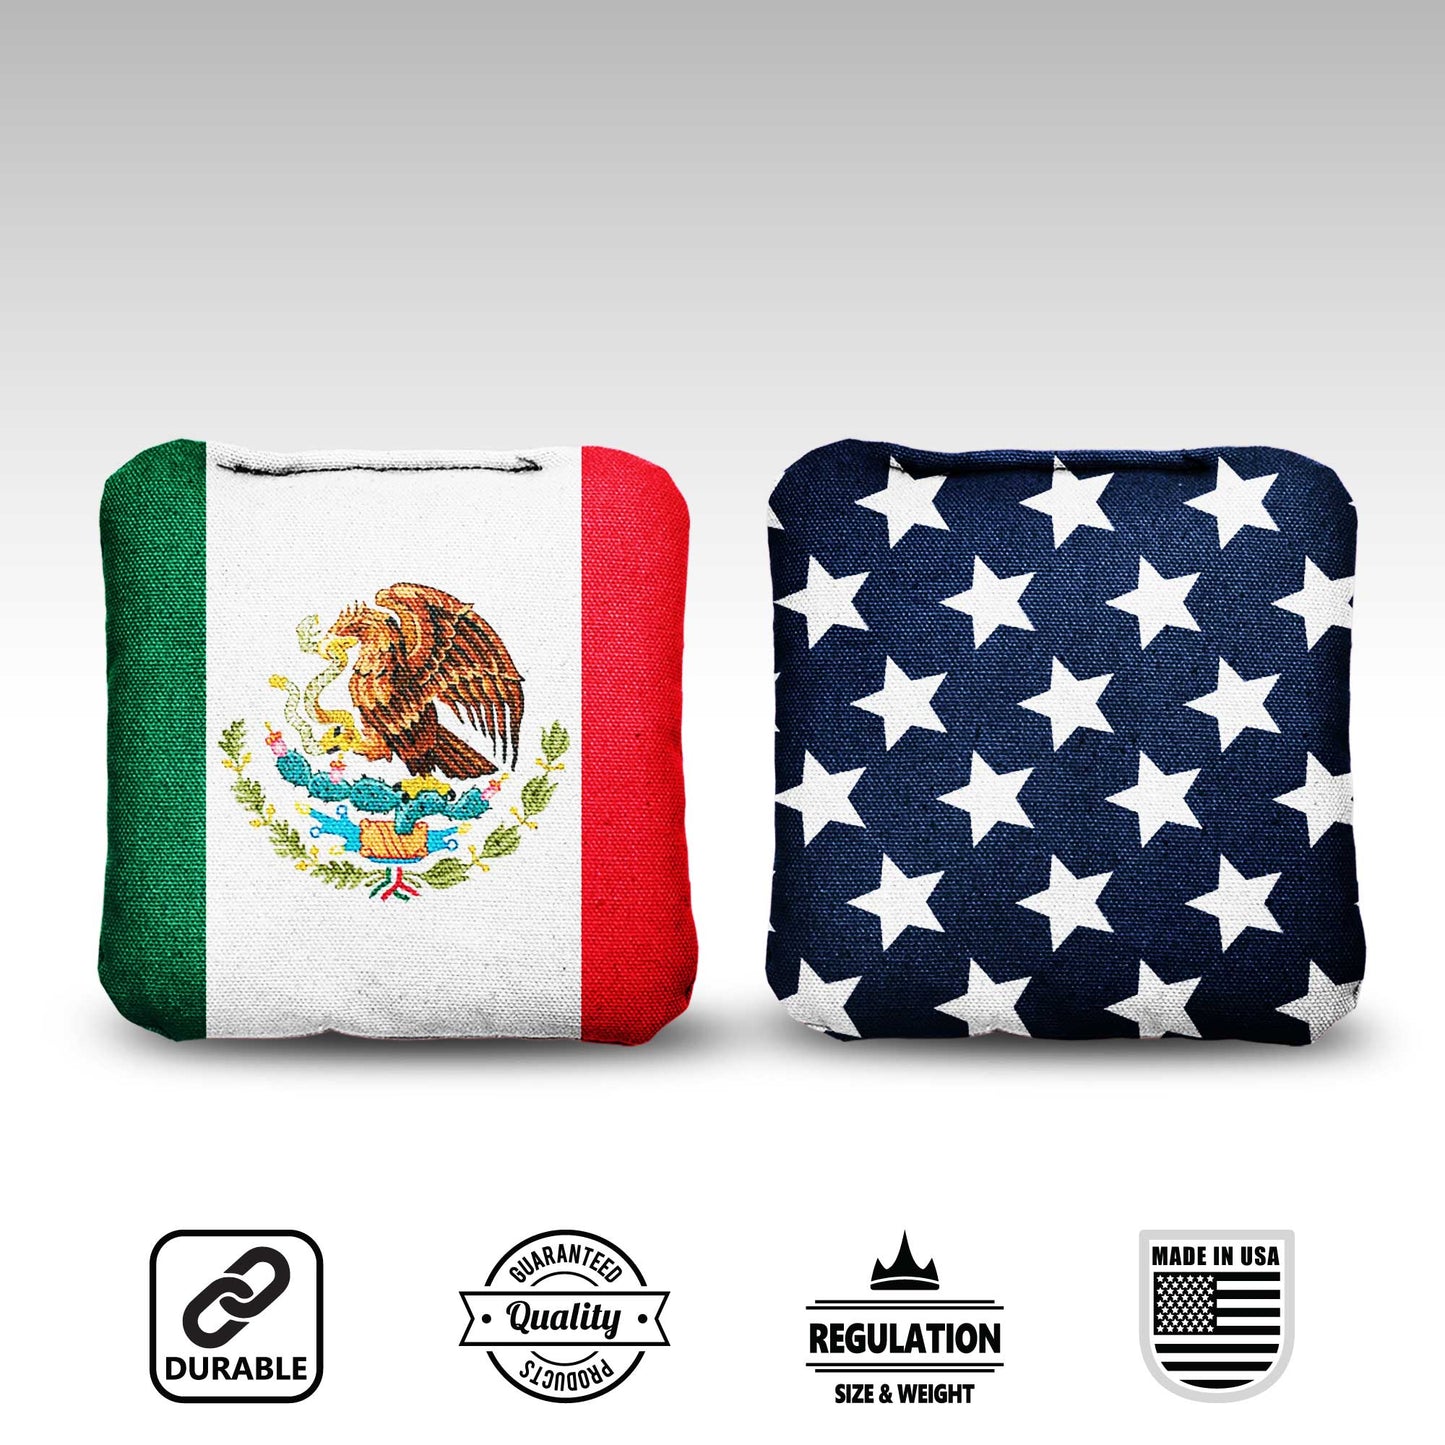 The Mexi(Cans) and Mericas - 8 Cornhole Bags